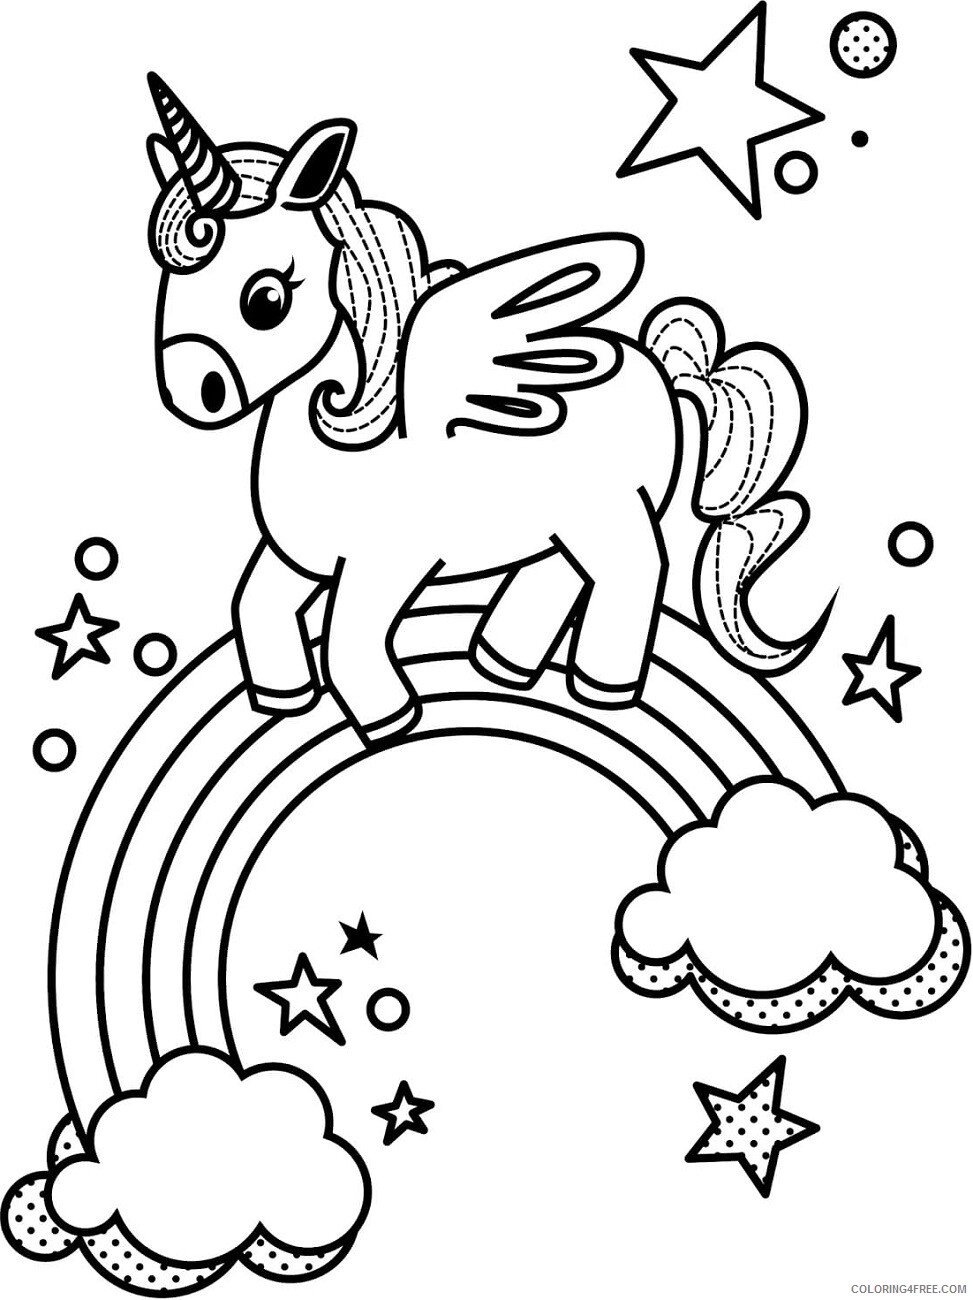 Rainbow Coloring Pages little_unicorn_n_rainbow a4 Printable 2021 5012